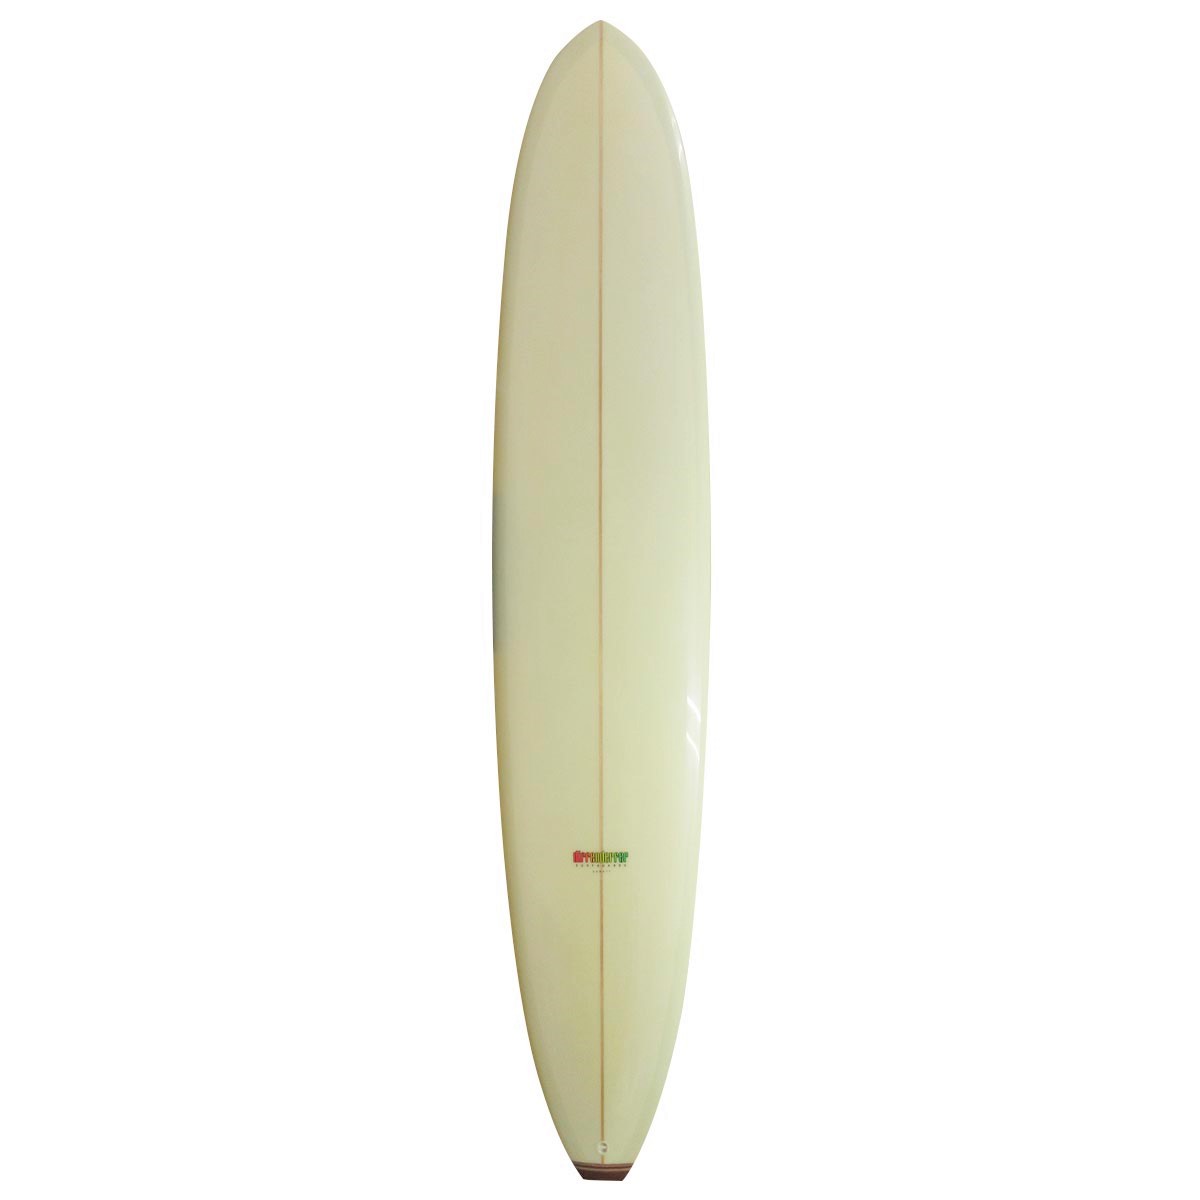  / MIKE DIFFENDERFER / 9`6 CUSTOM SINGLE FIN Shaped by Mike Diffenderfer